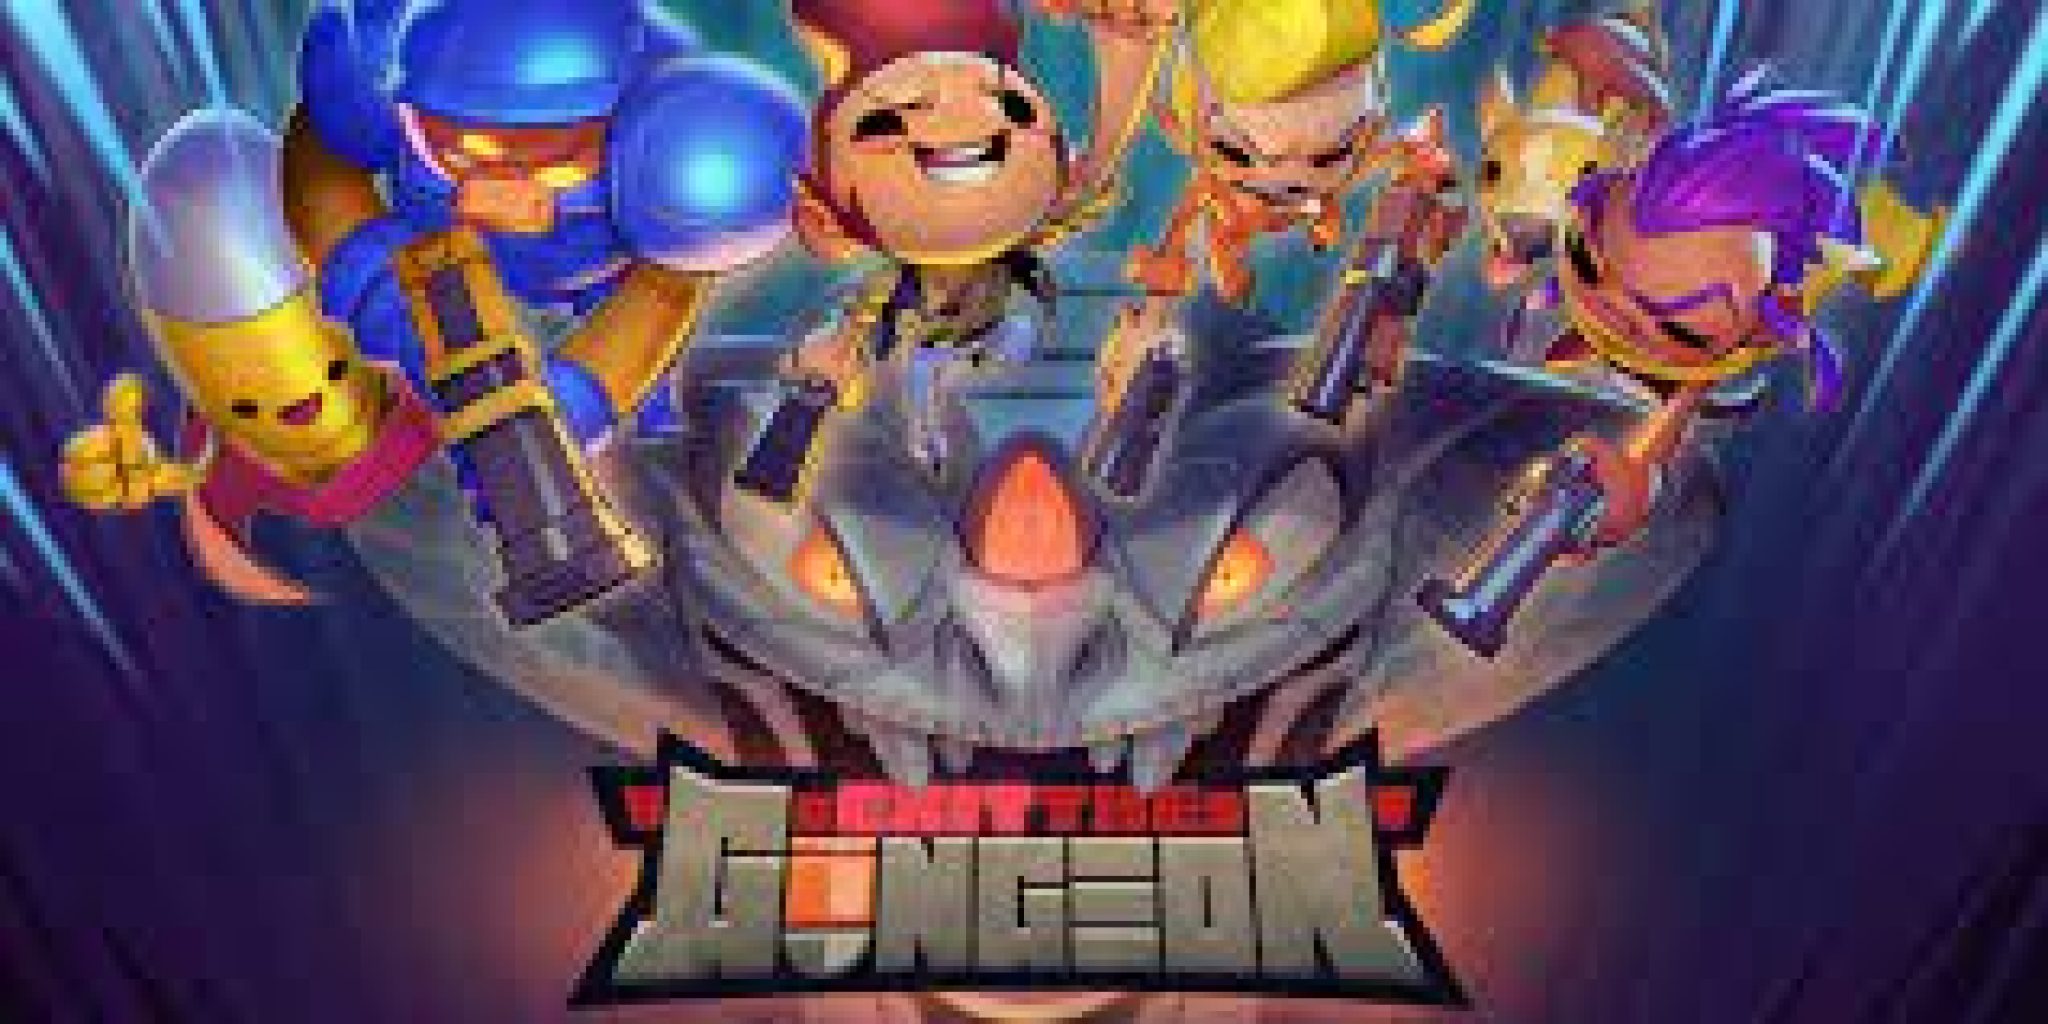 when will exit the gungeon come out